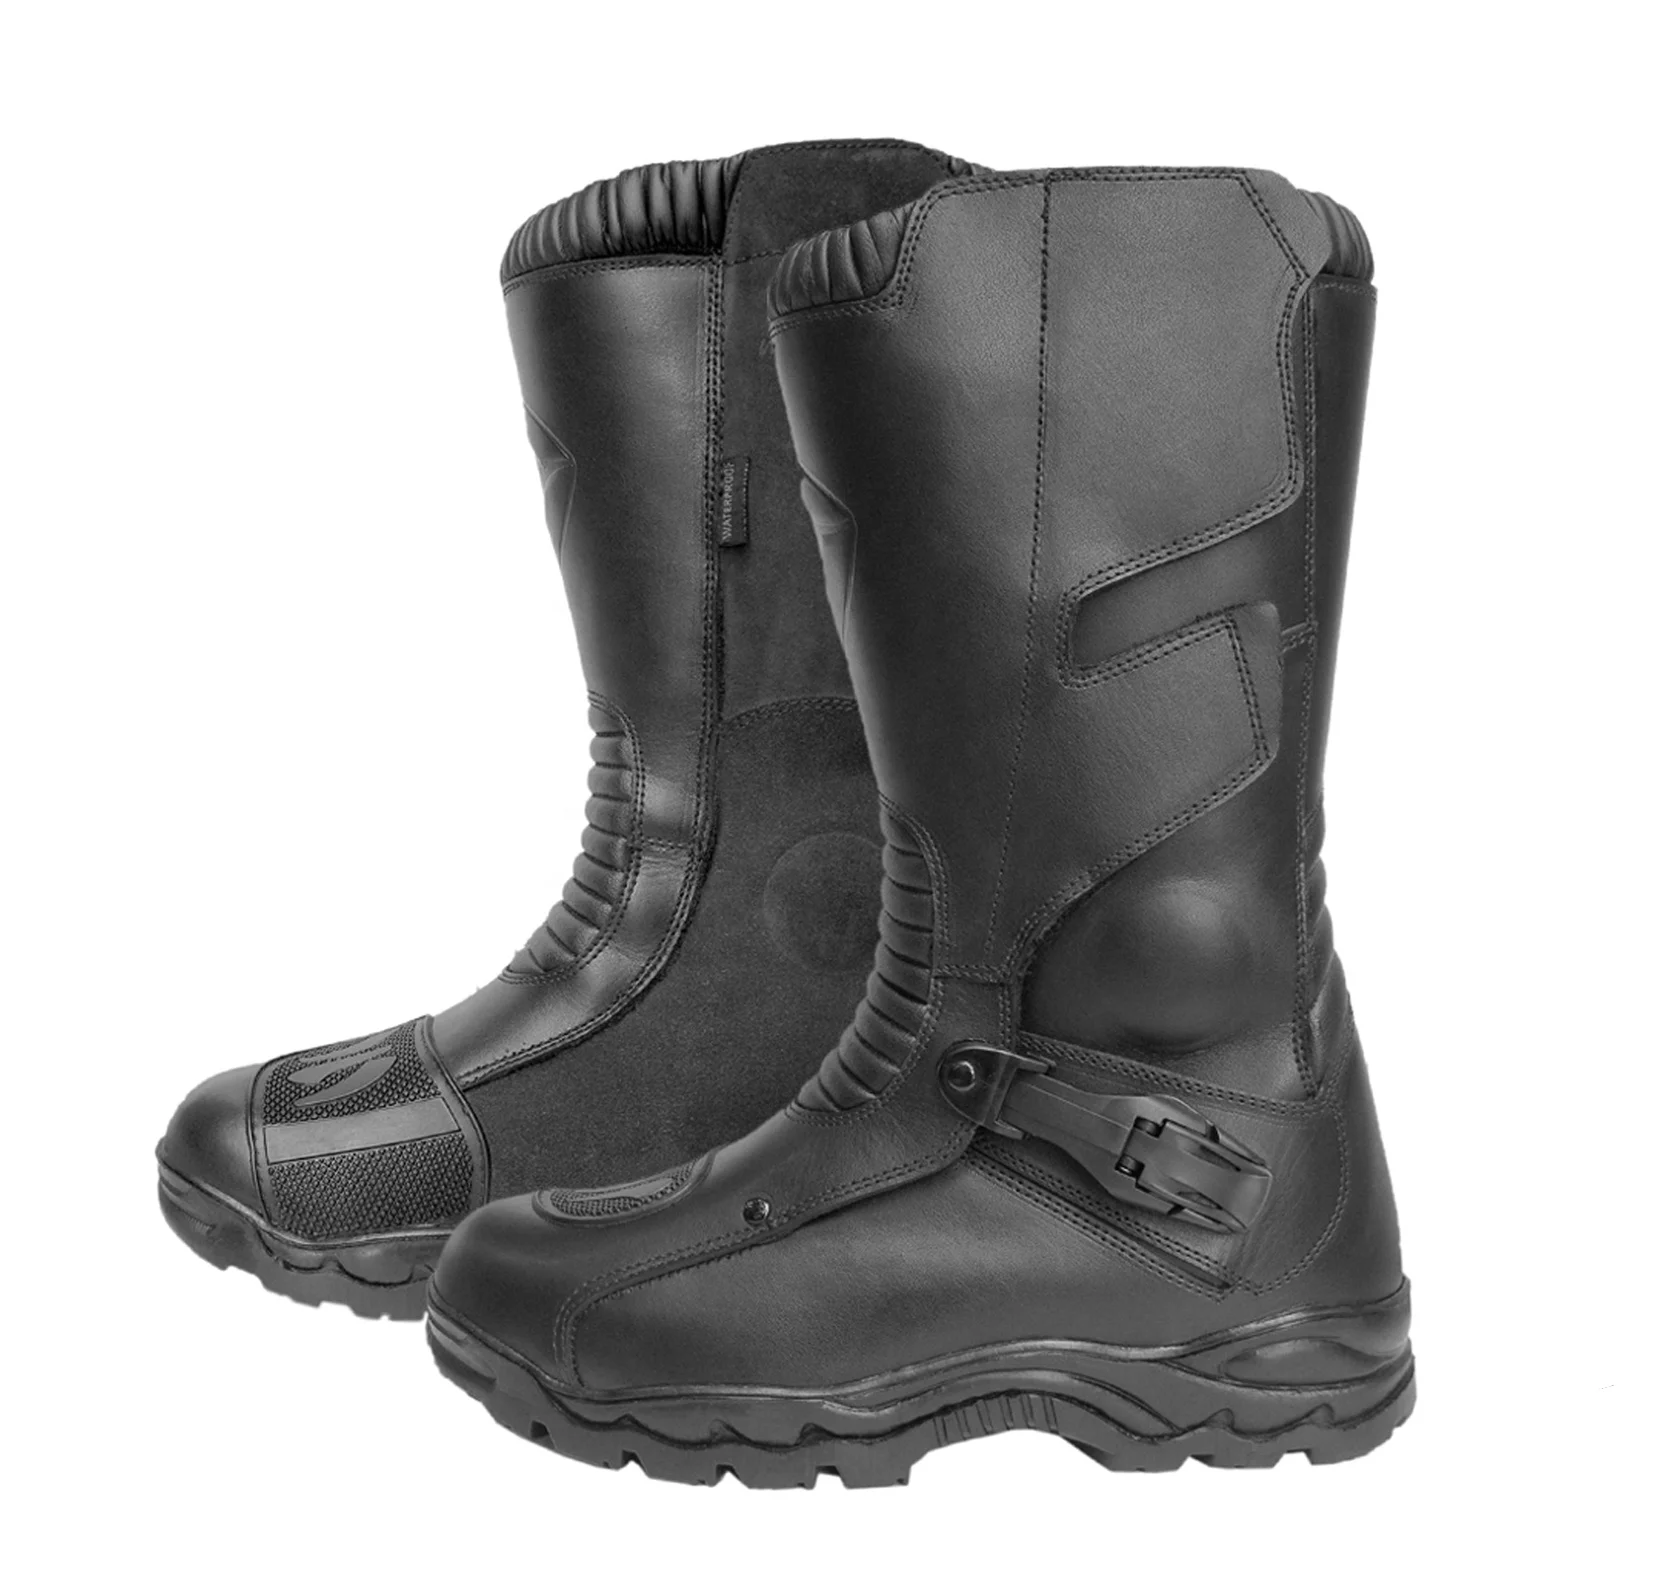 off road motorbike boots